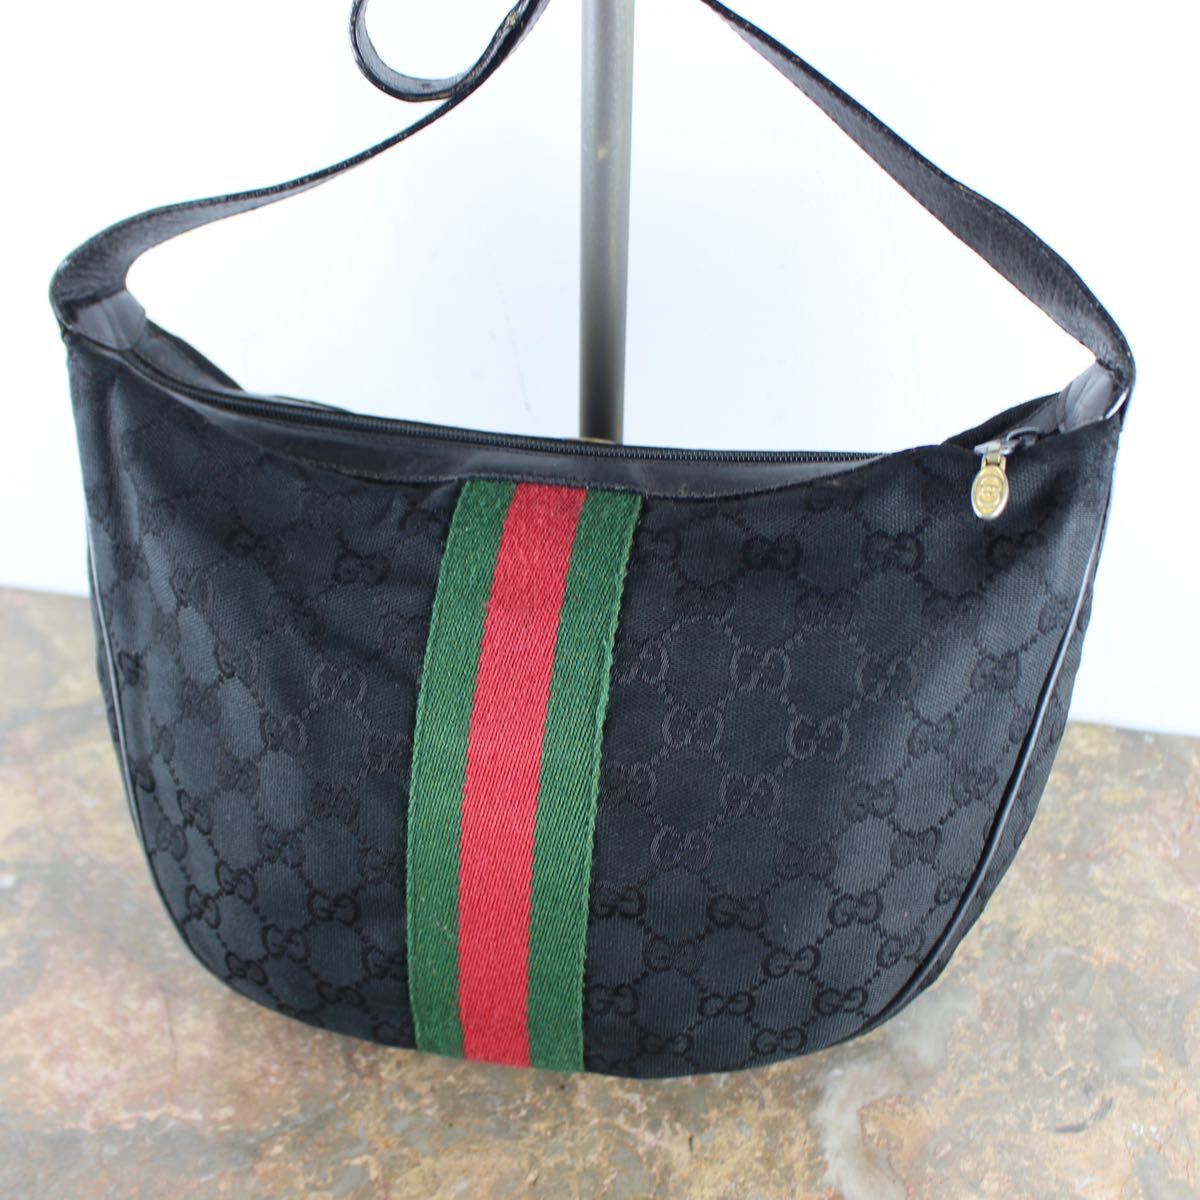 OLD GUCCI GG PATTERNED SHERRY LINE SHOULDER BAG MADE IN ITALY/オールドグッチGG柄シェリーラインショルダーバッグ